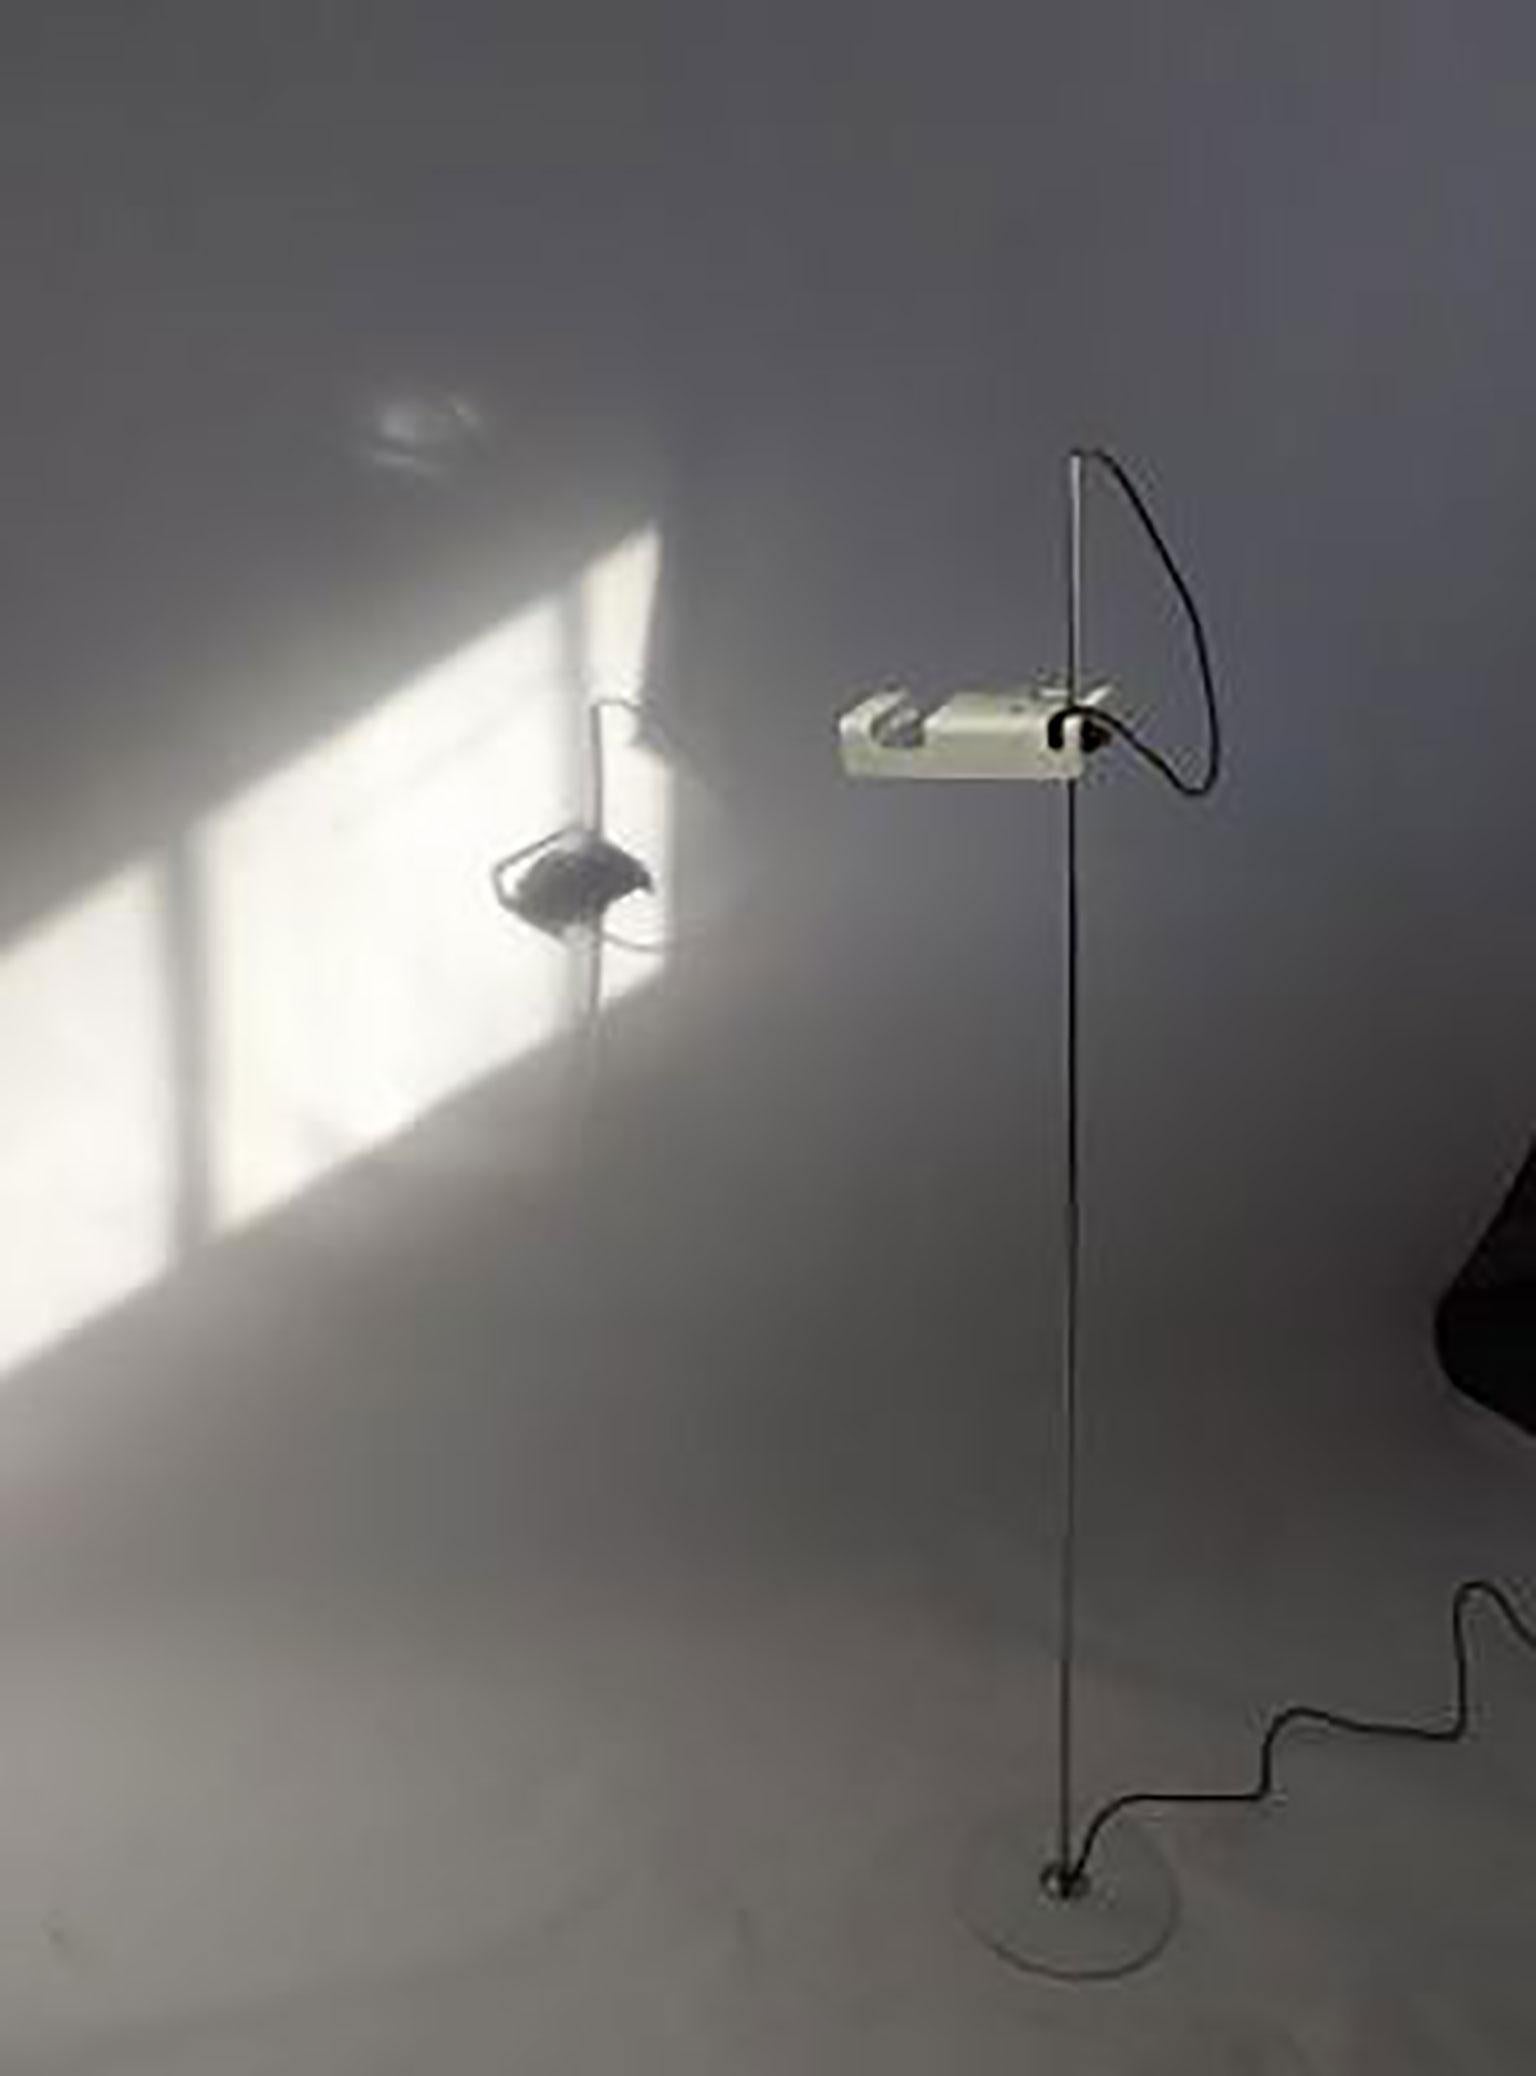 Spider floor lamp by Joe Colombo for Oluce. This minimalistic light fixture features a unique design with the head of the lamp connected to the stem by a plastic joint that is responsible for tilting the lamp side-to-side. The lamp produces a direct